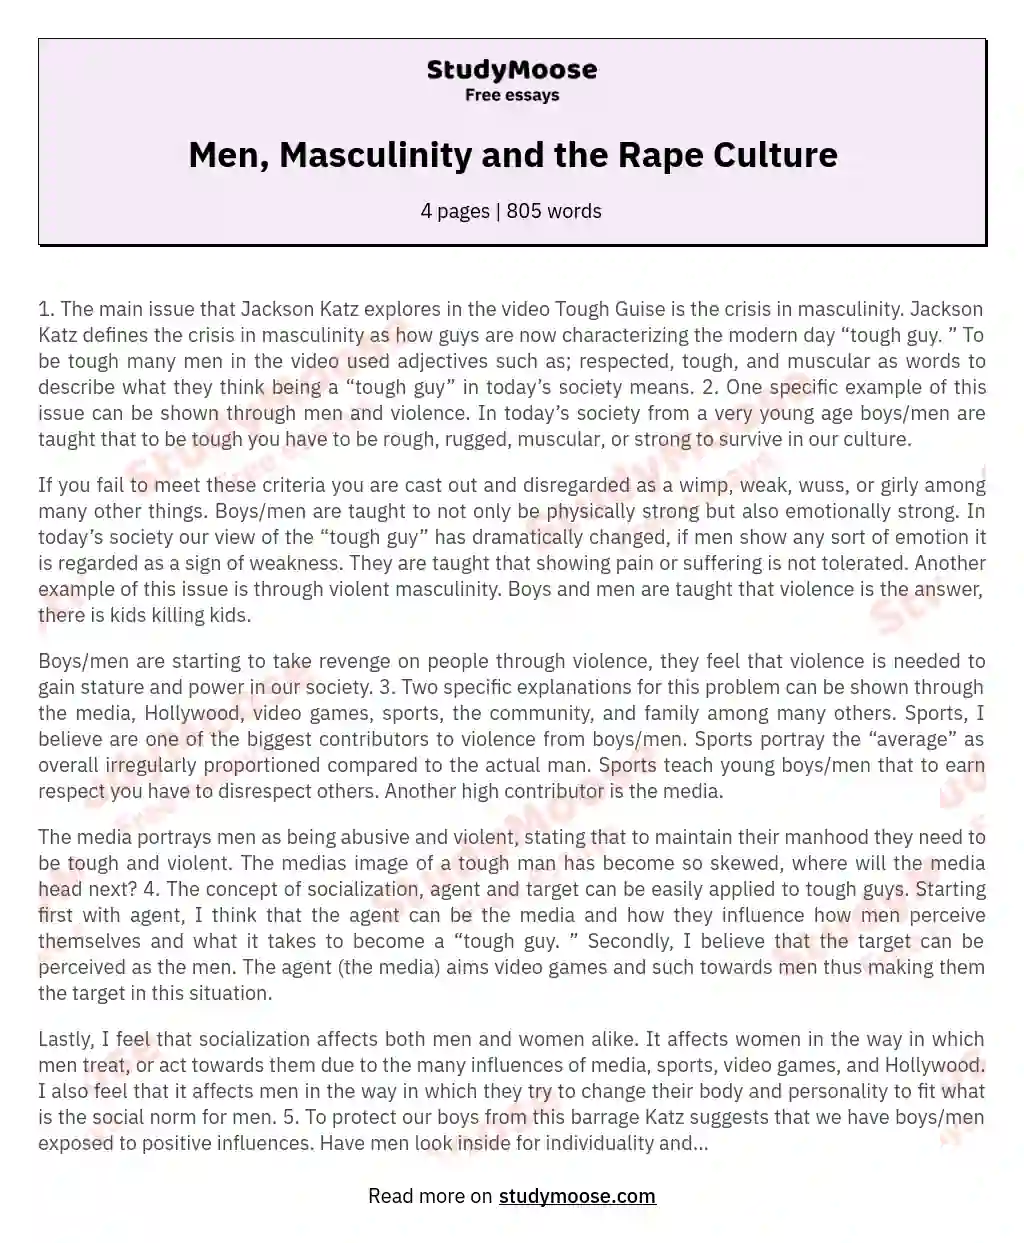 Men, Masculinity and the Rape Culture essay